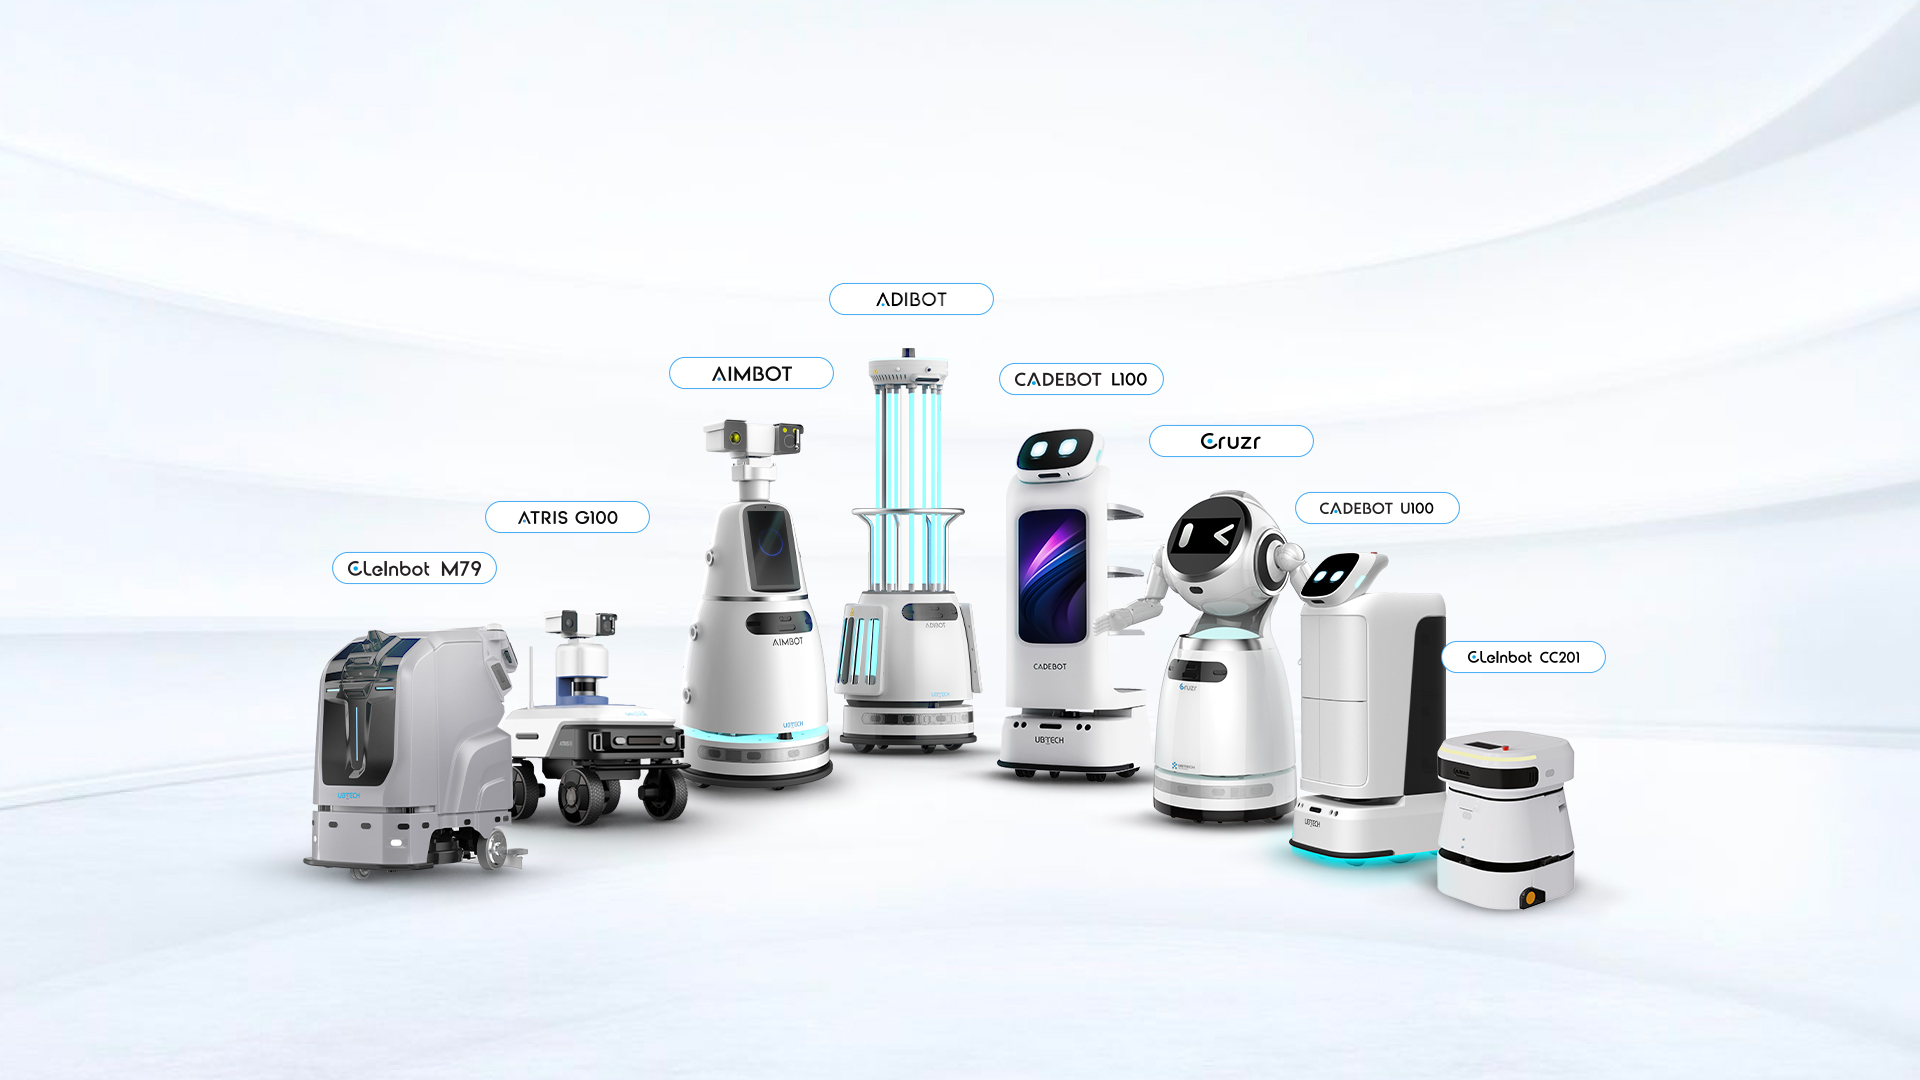 General Service Smart Robotic Products and Solutions